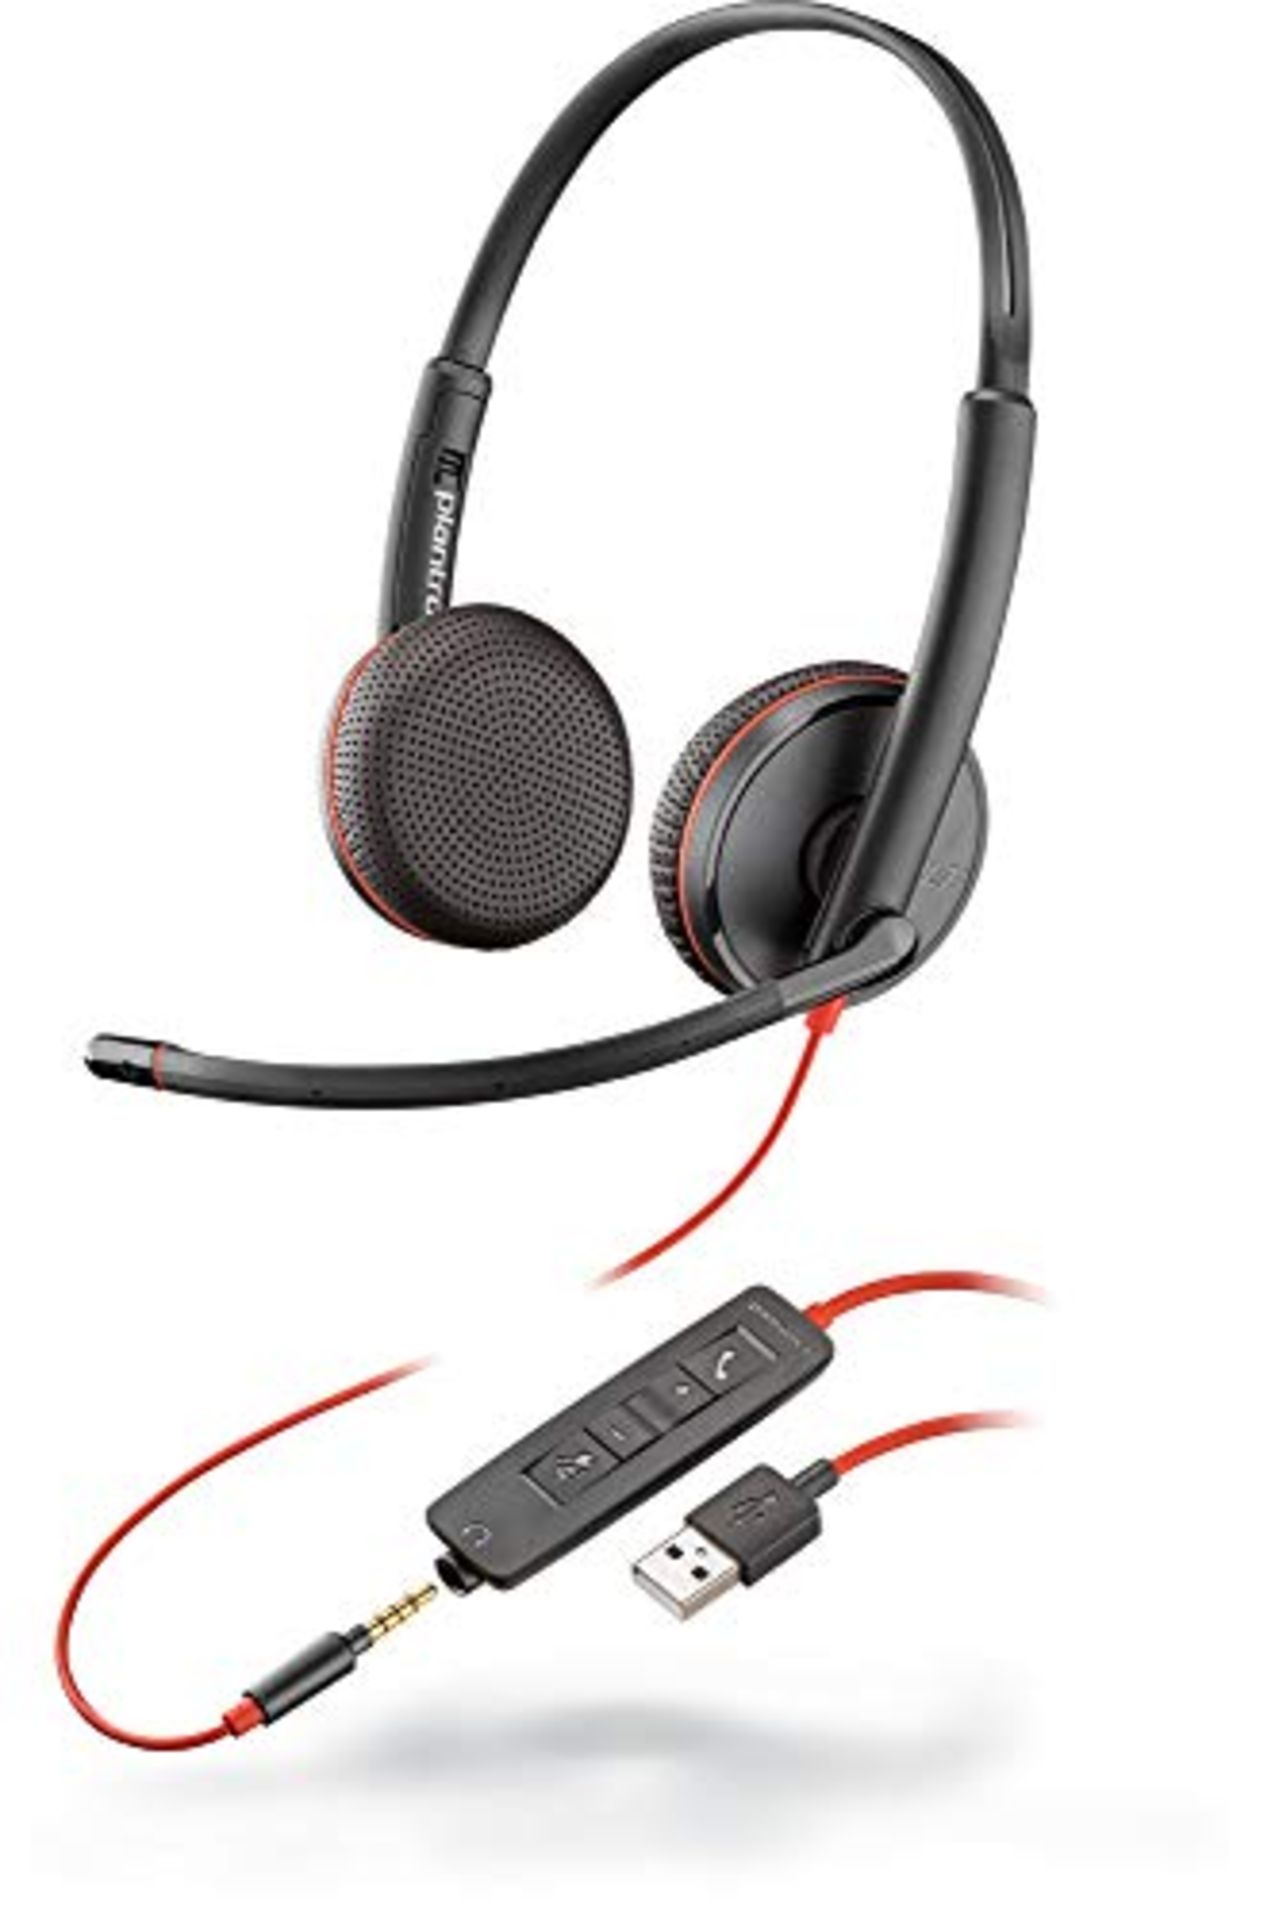 Plantronics - Blackwire 3225 USB-A Wired Headset - Dual-Ear (Stereo) with Boom Mic - C